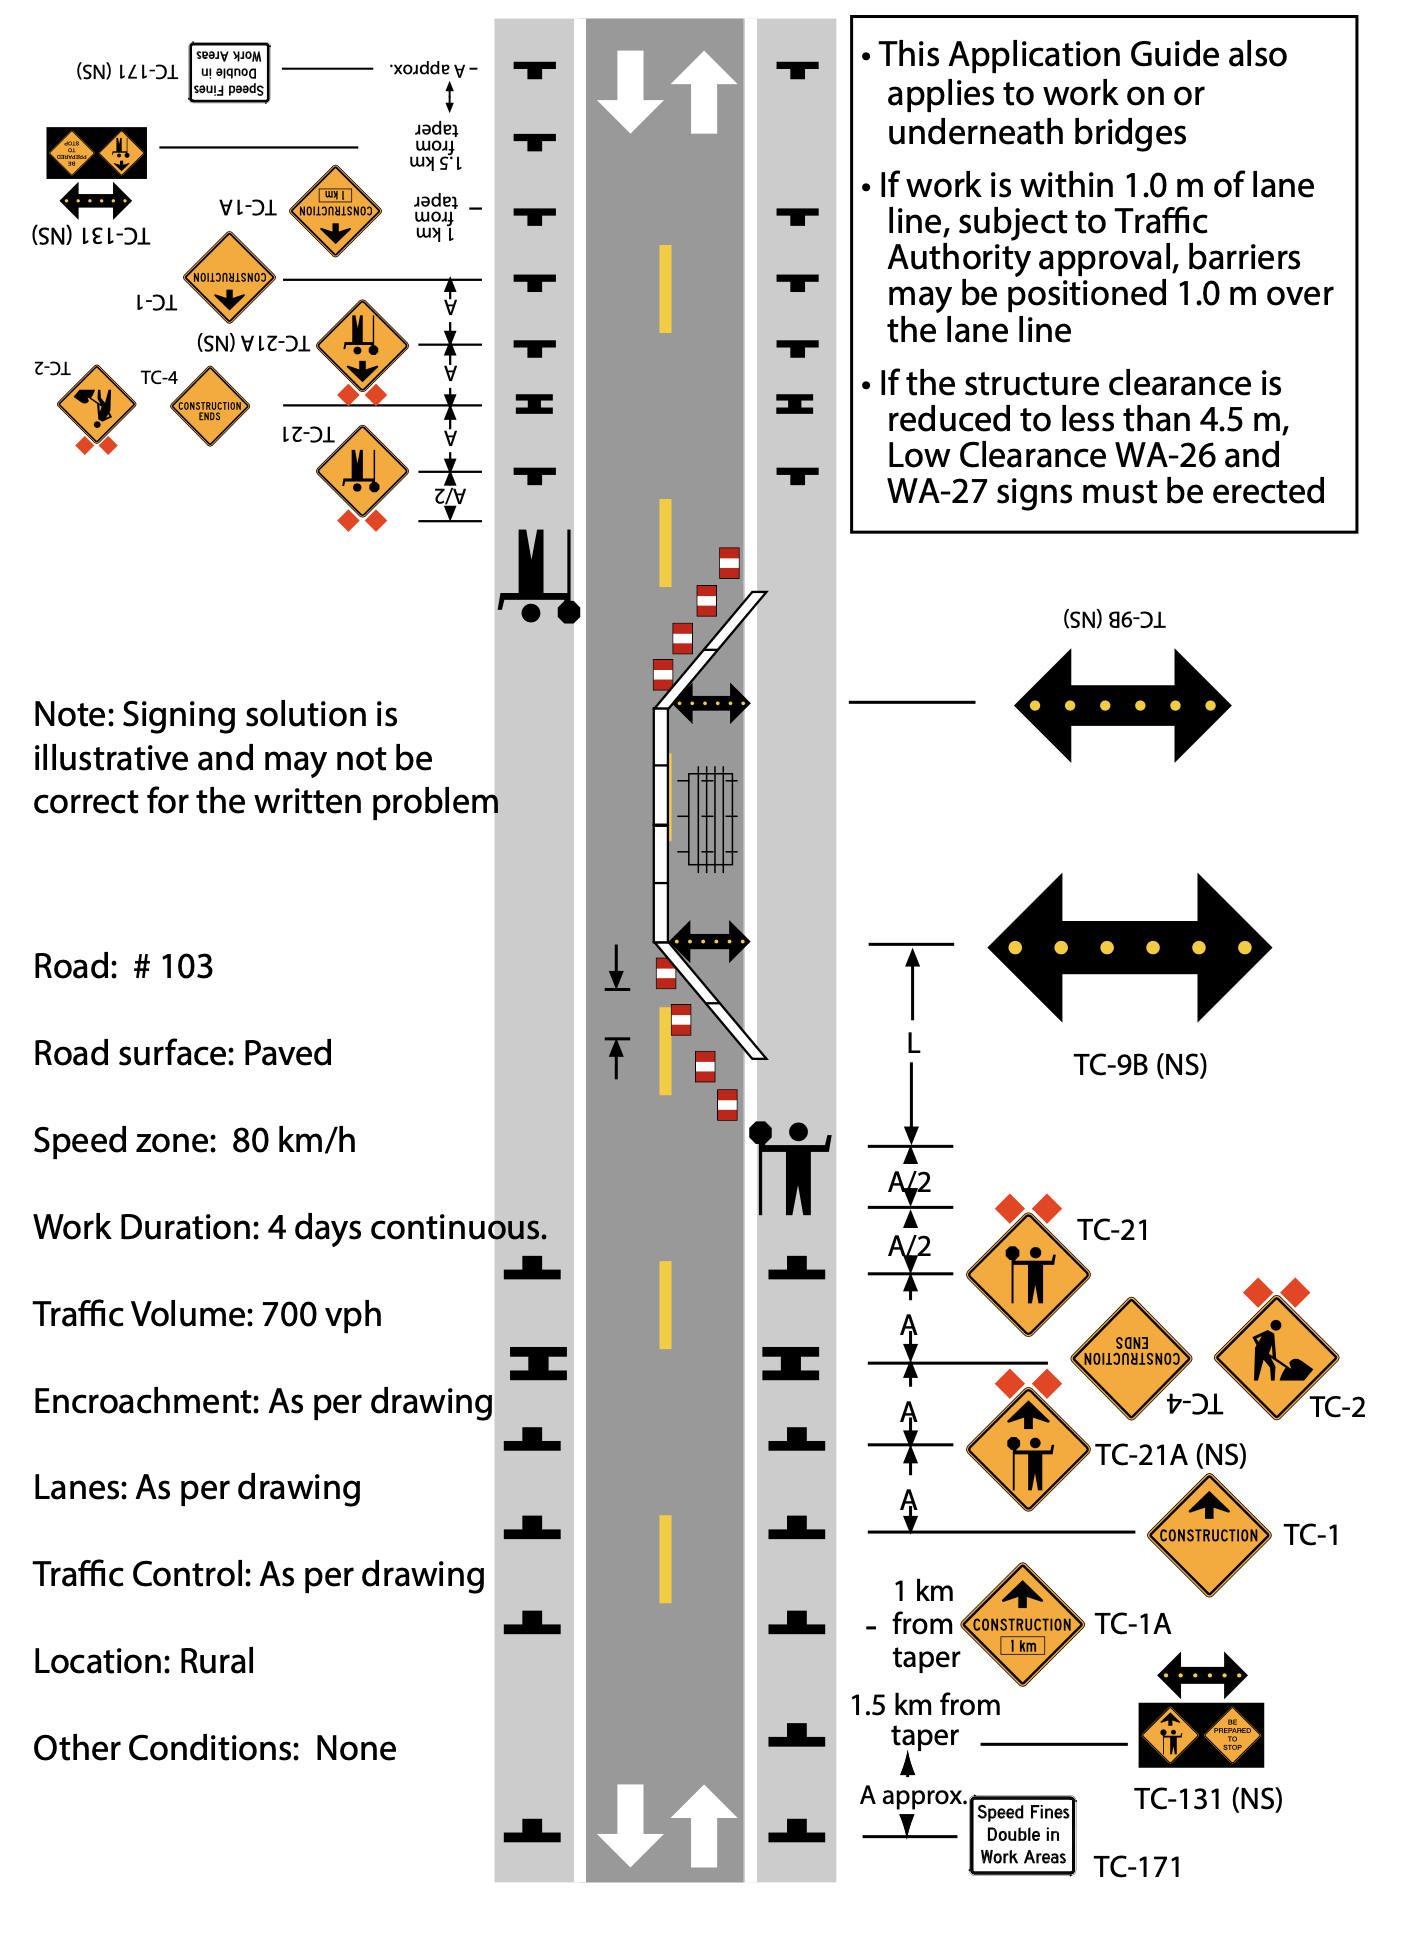 A schematic of a road indicating sign and device placements, and details about the road, surface, work duration, and encroachment.